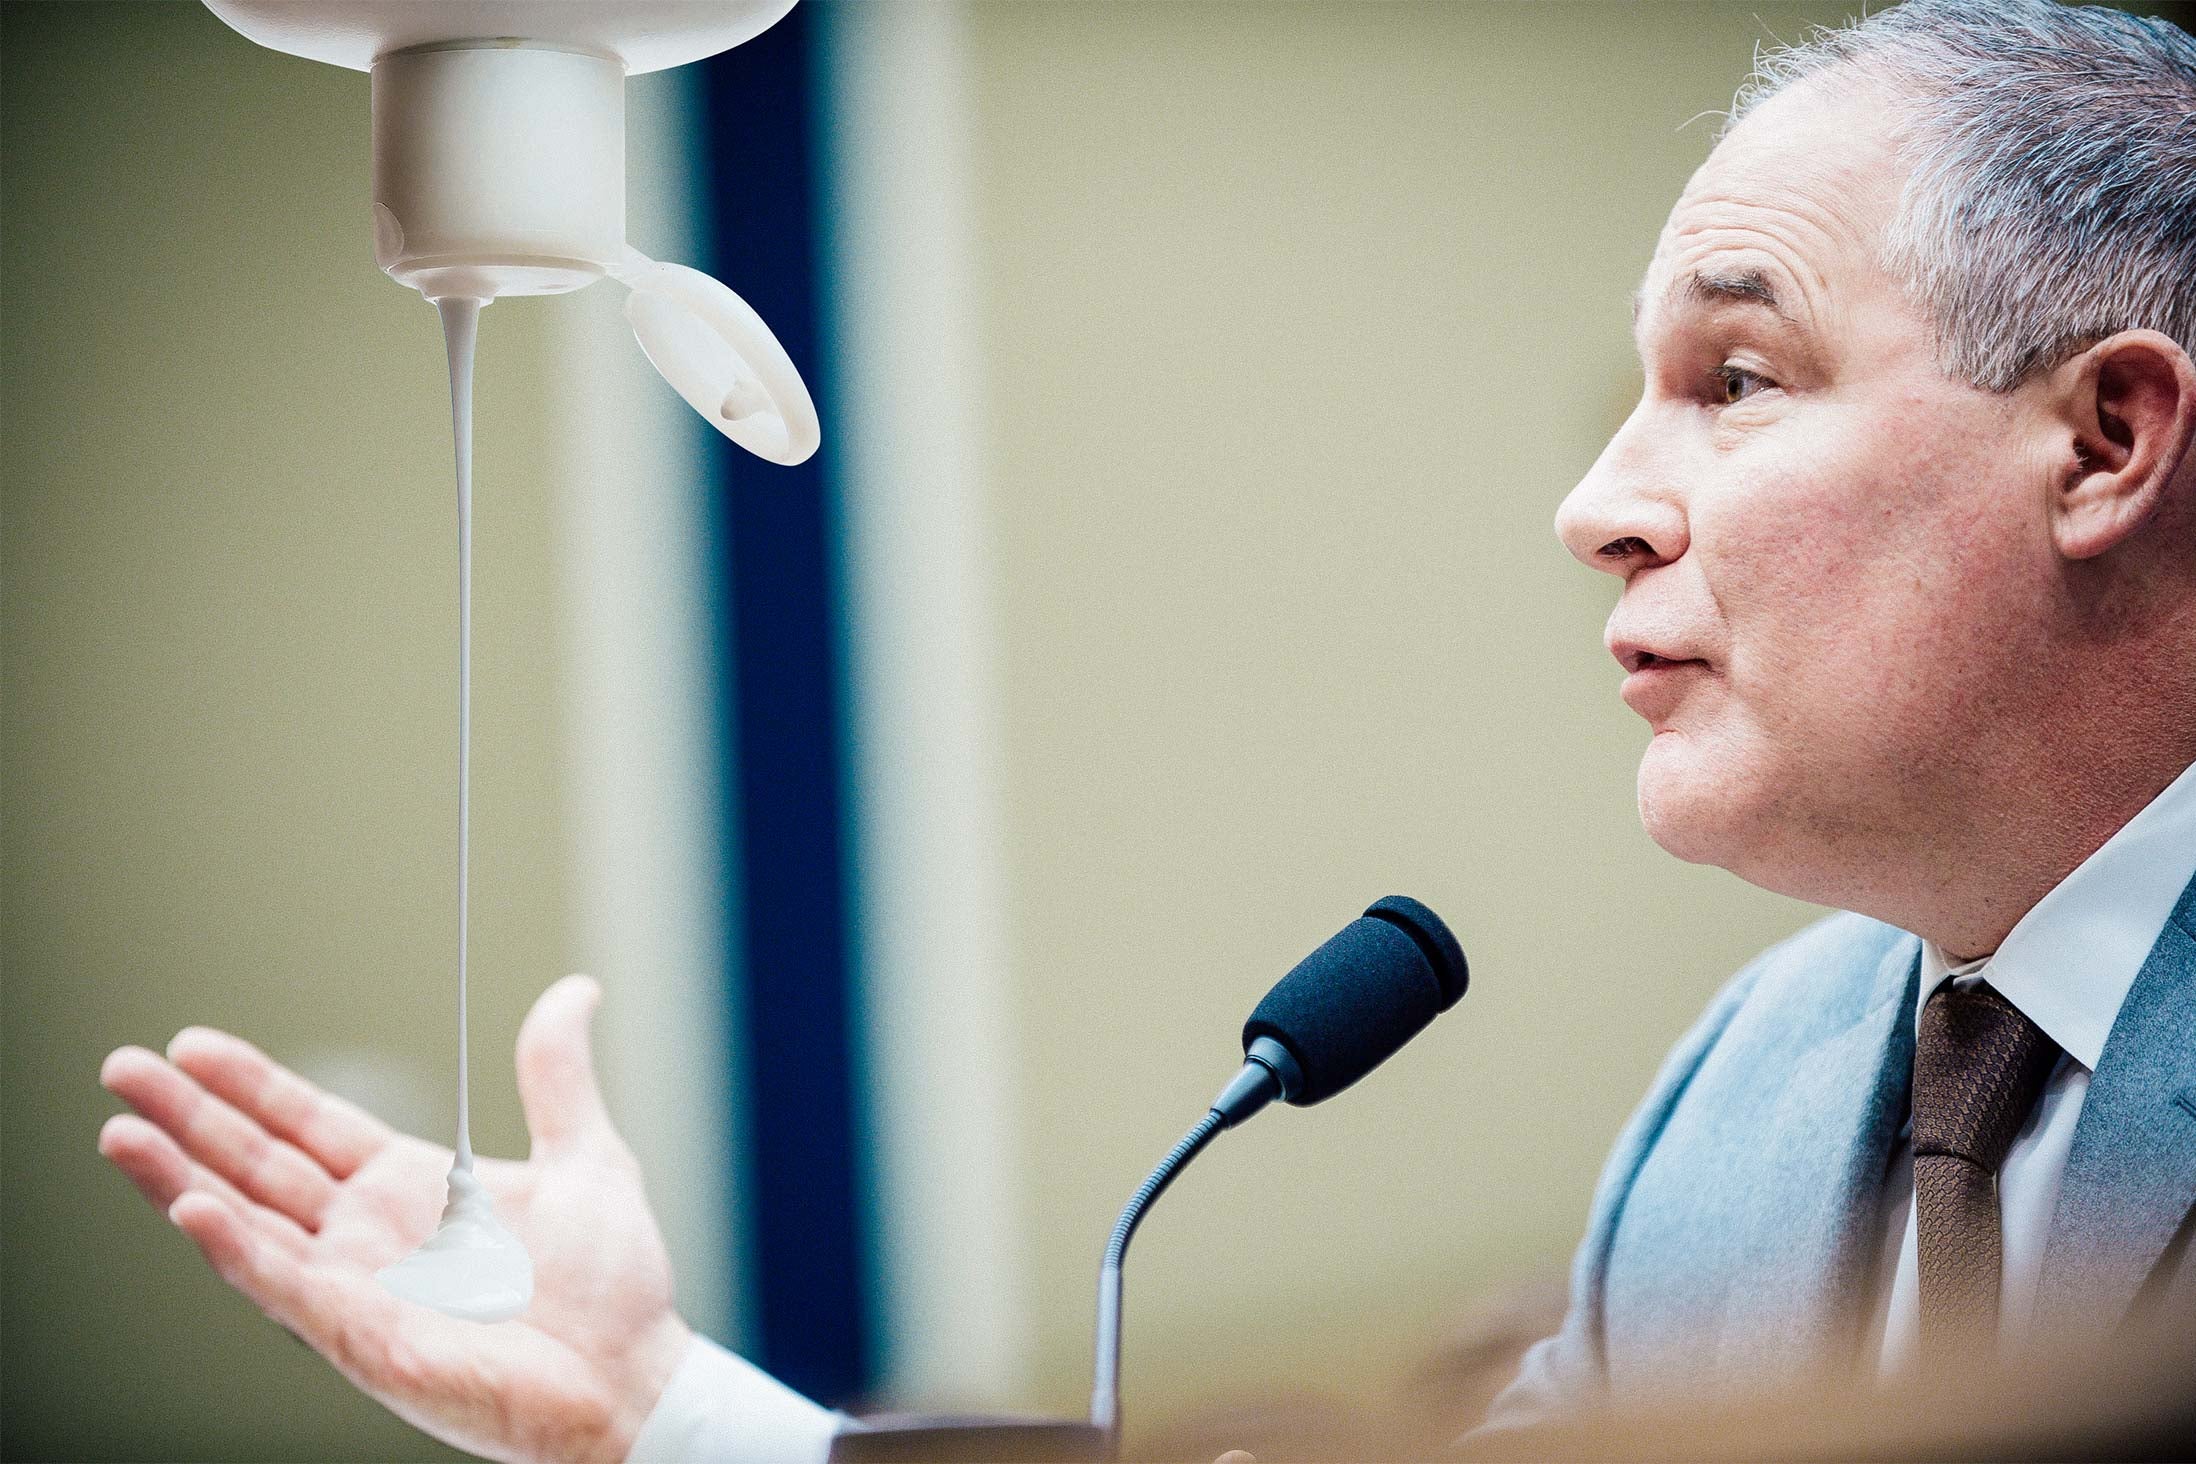 Pruitt gestures with his right hand as it is filled by a giant photoshopped bottle of lotion.